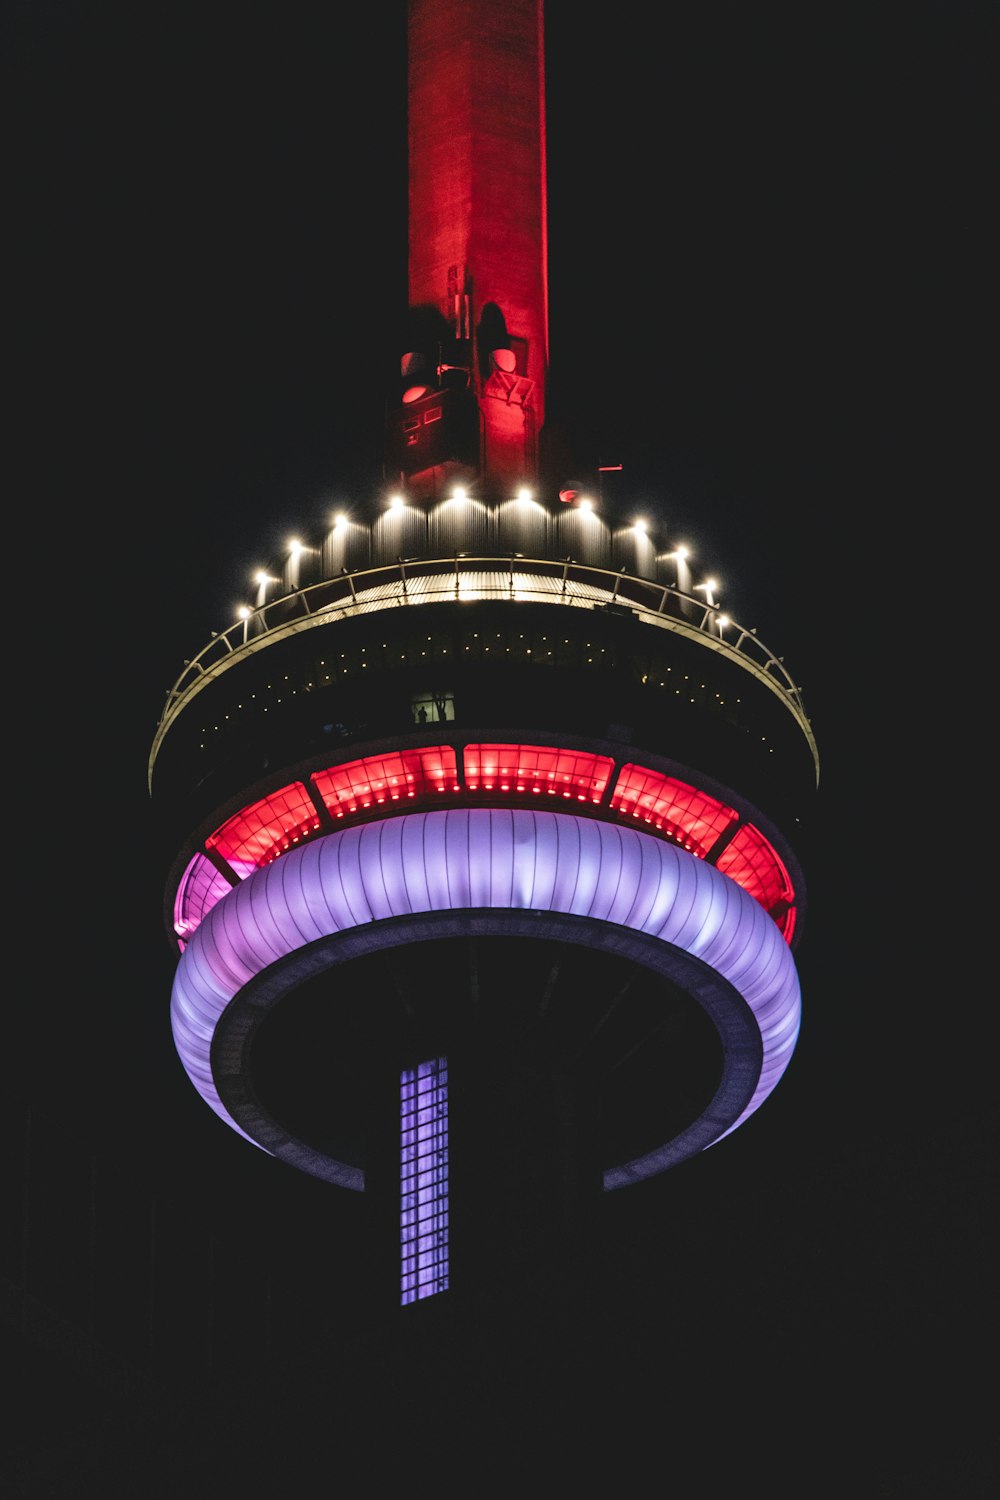 red and black tower with lights during night time